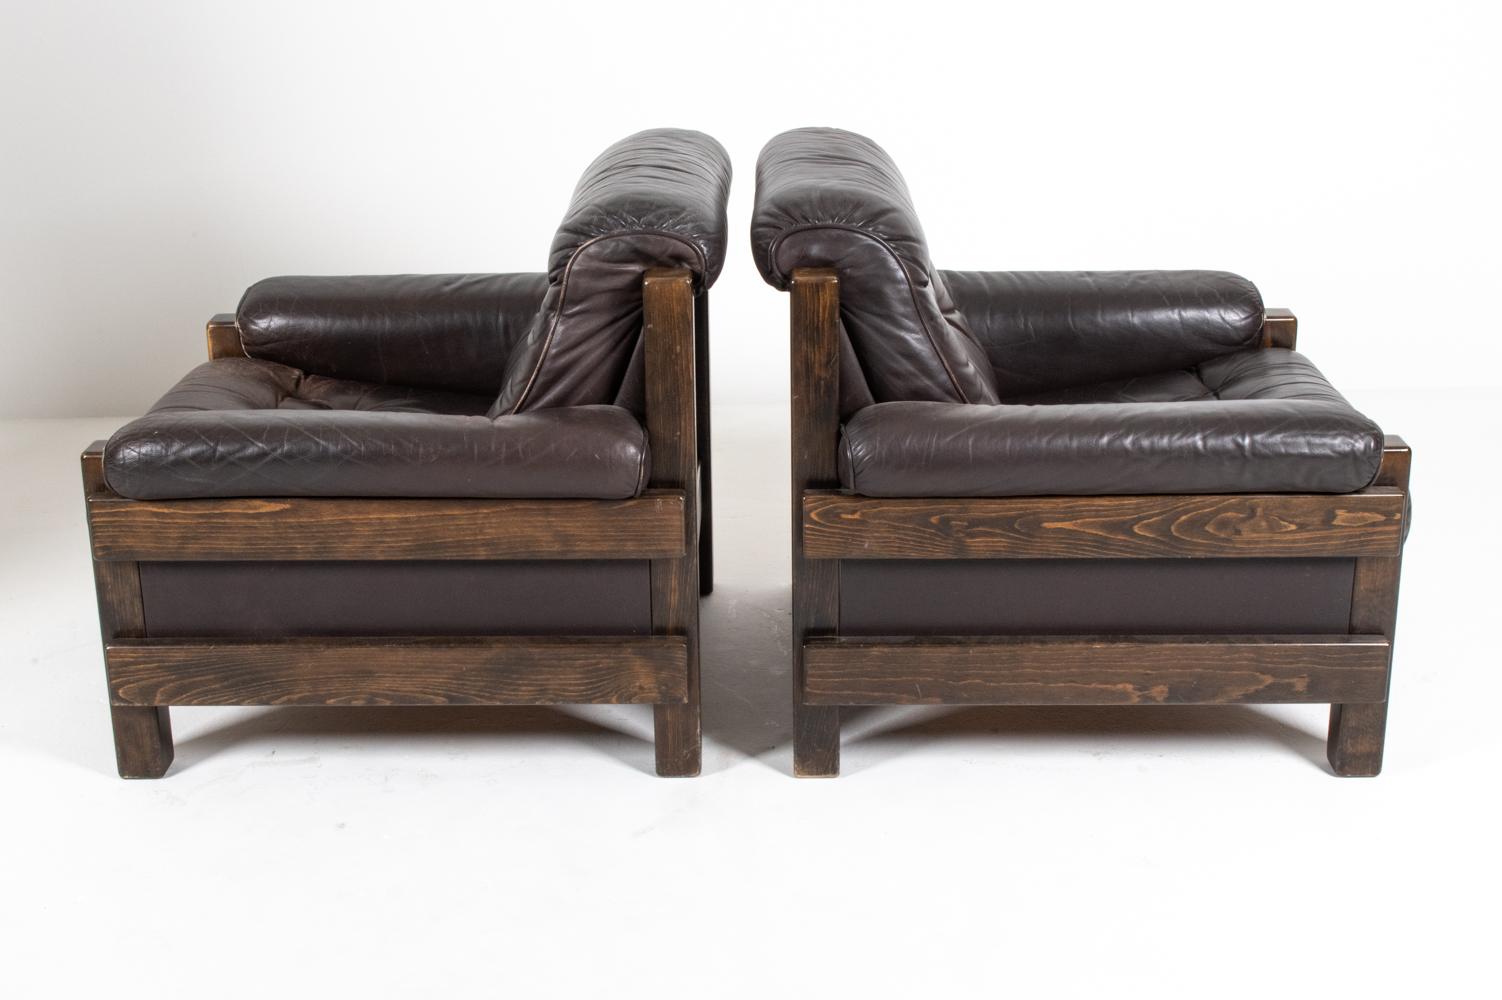 Pair of Swedish Mid-Century Tufted Leather Lounge Chairs by Ikea, 1970's For Sale 3